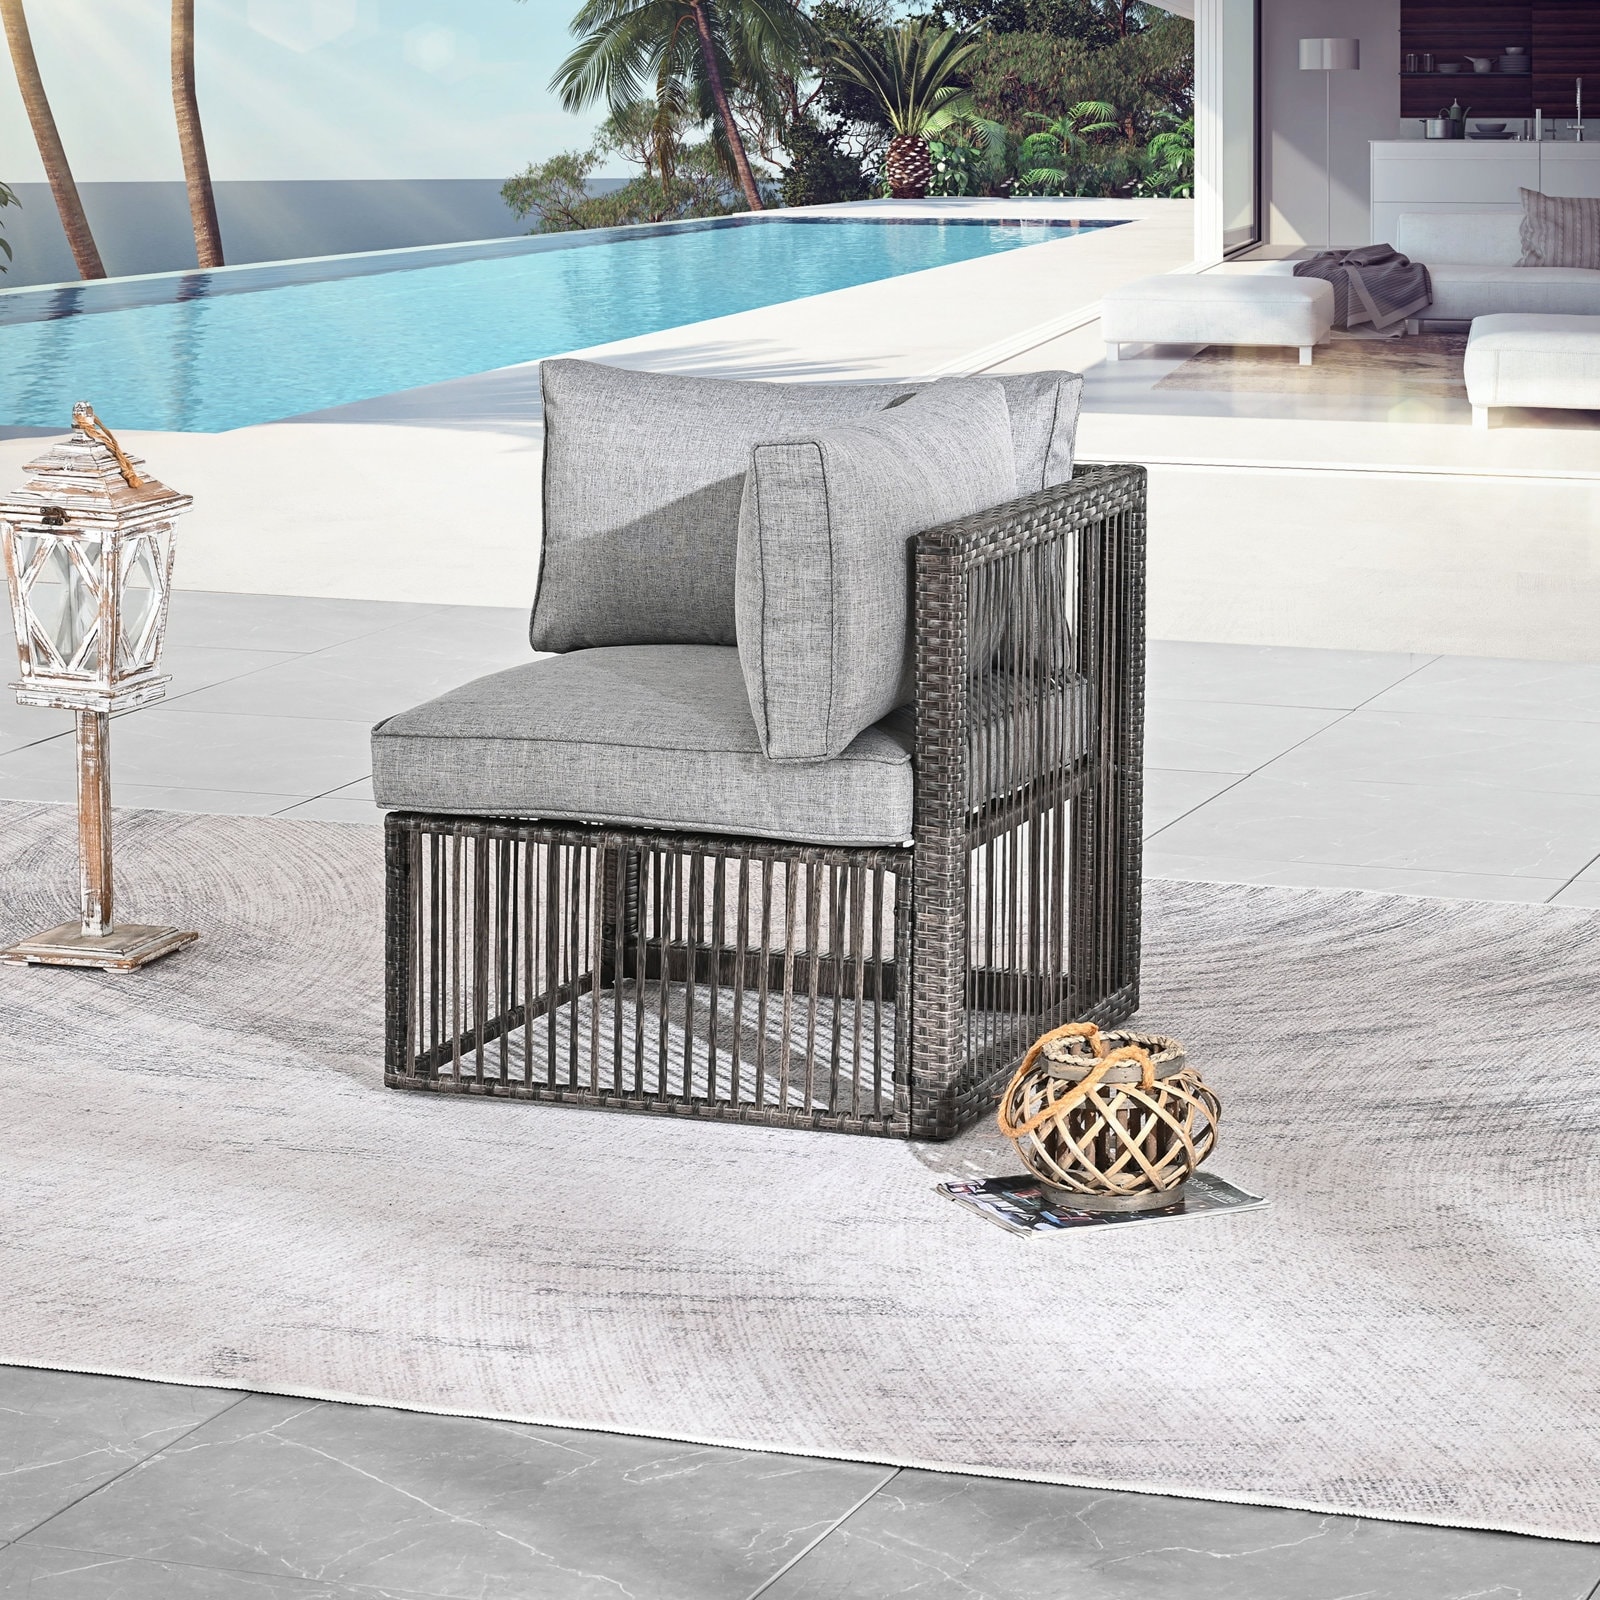 Patio Festival Y23 Outdoor Wicker Chair And Table Collection